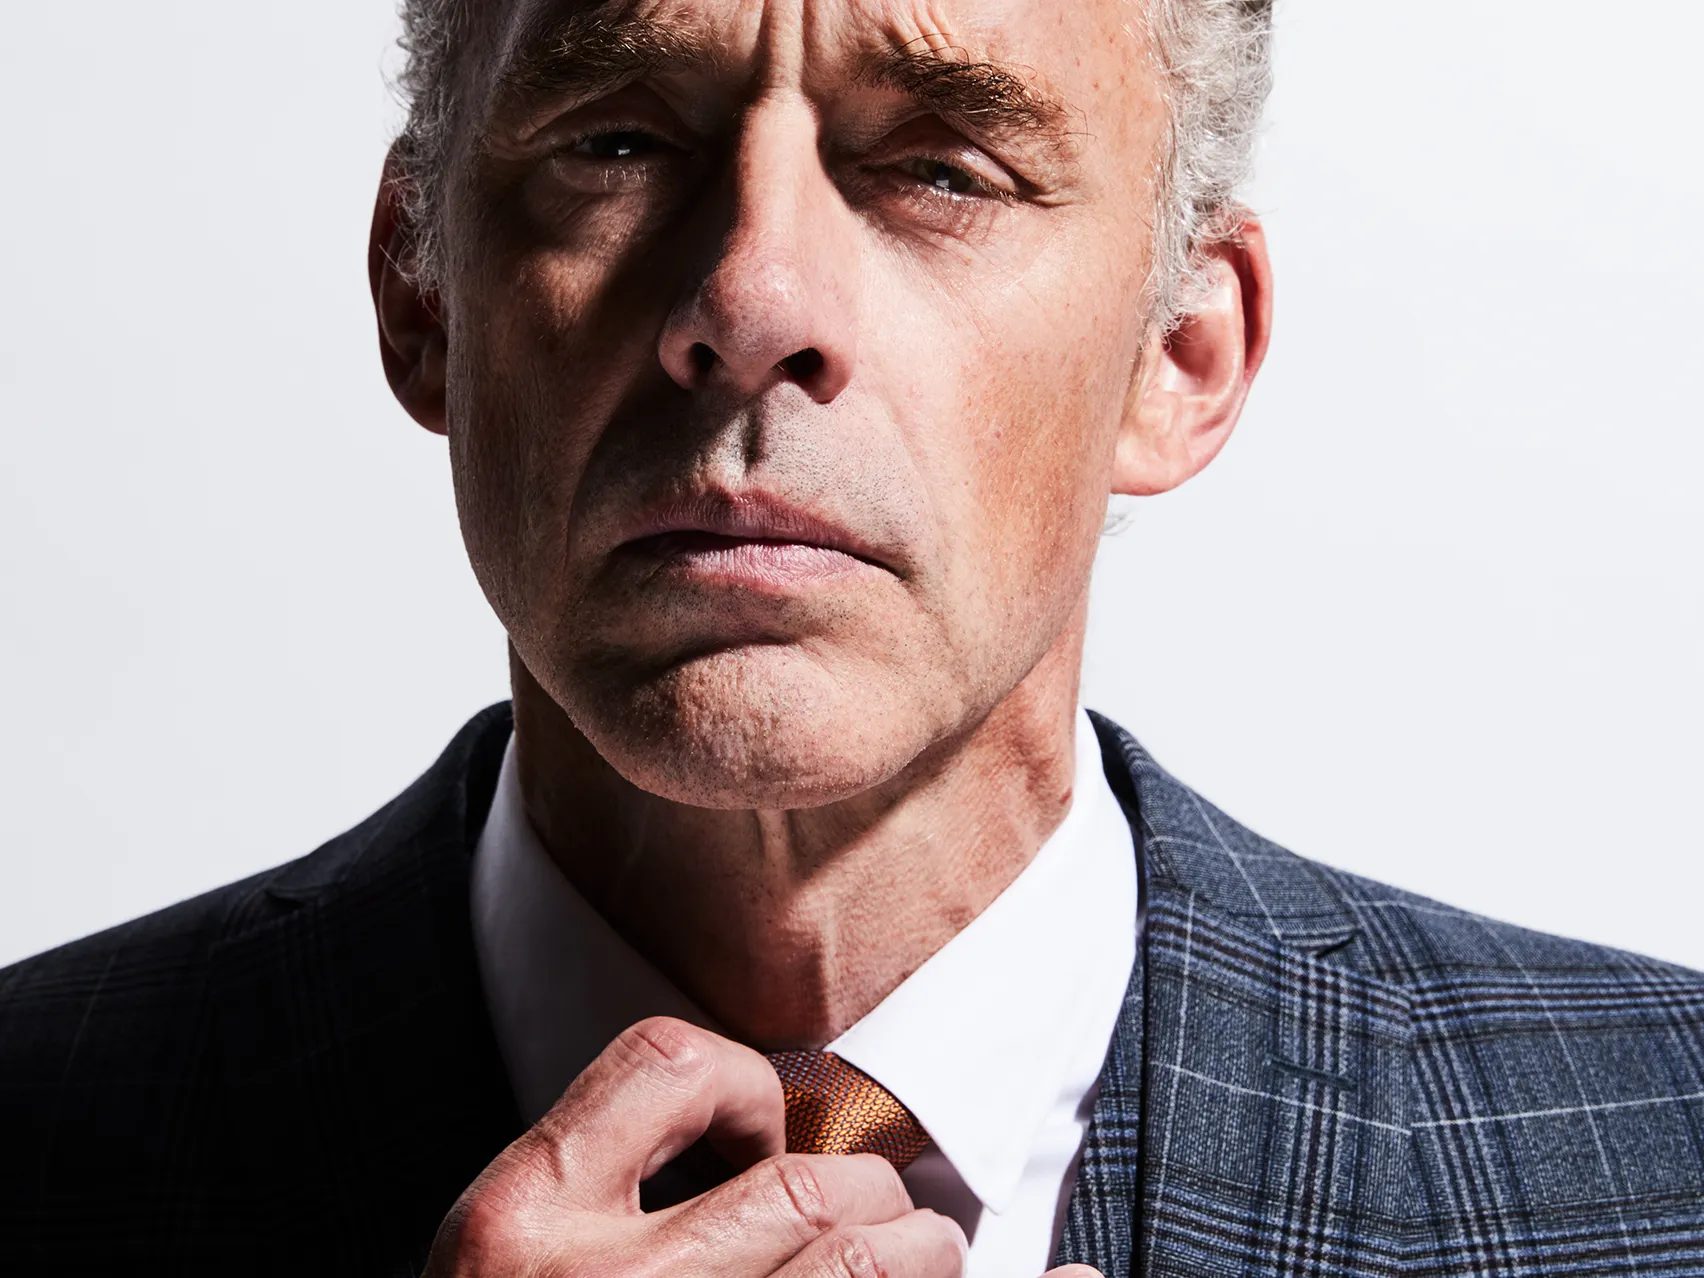 Jordan Peterson condemns Drag Queen Storytime (and other stories)